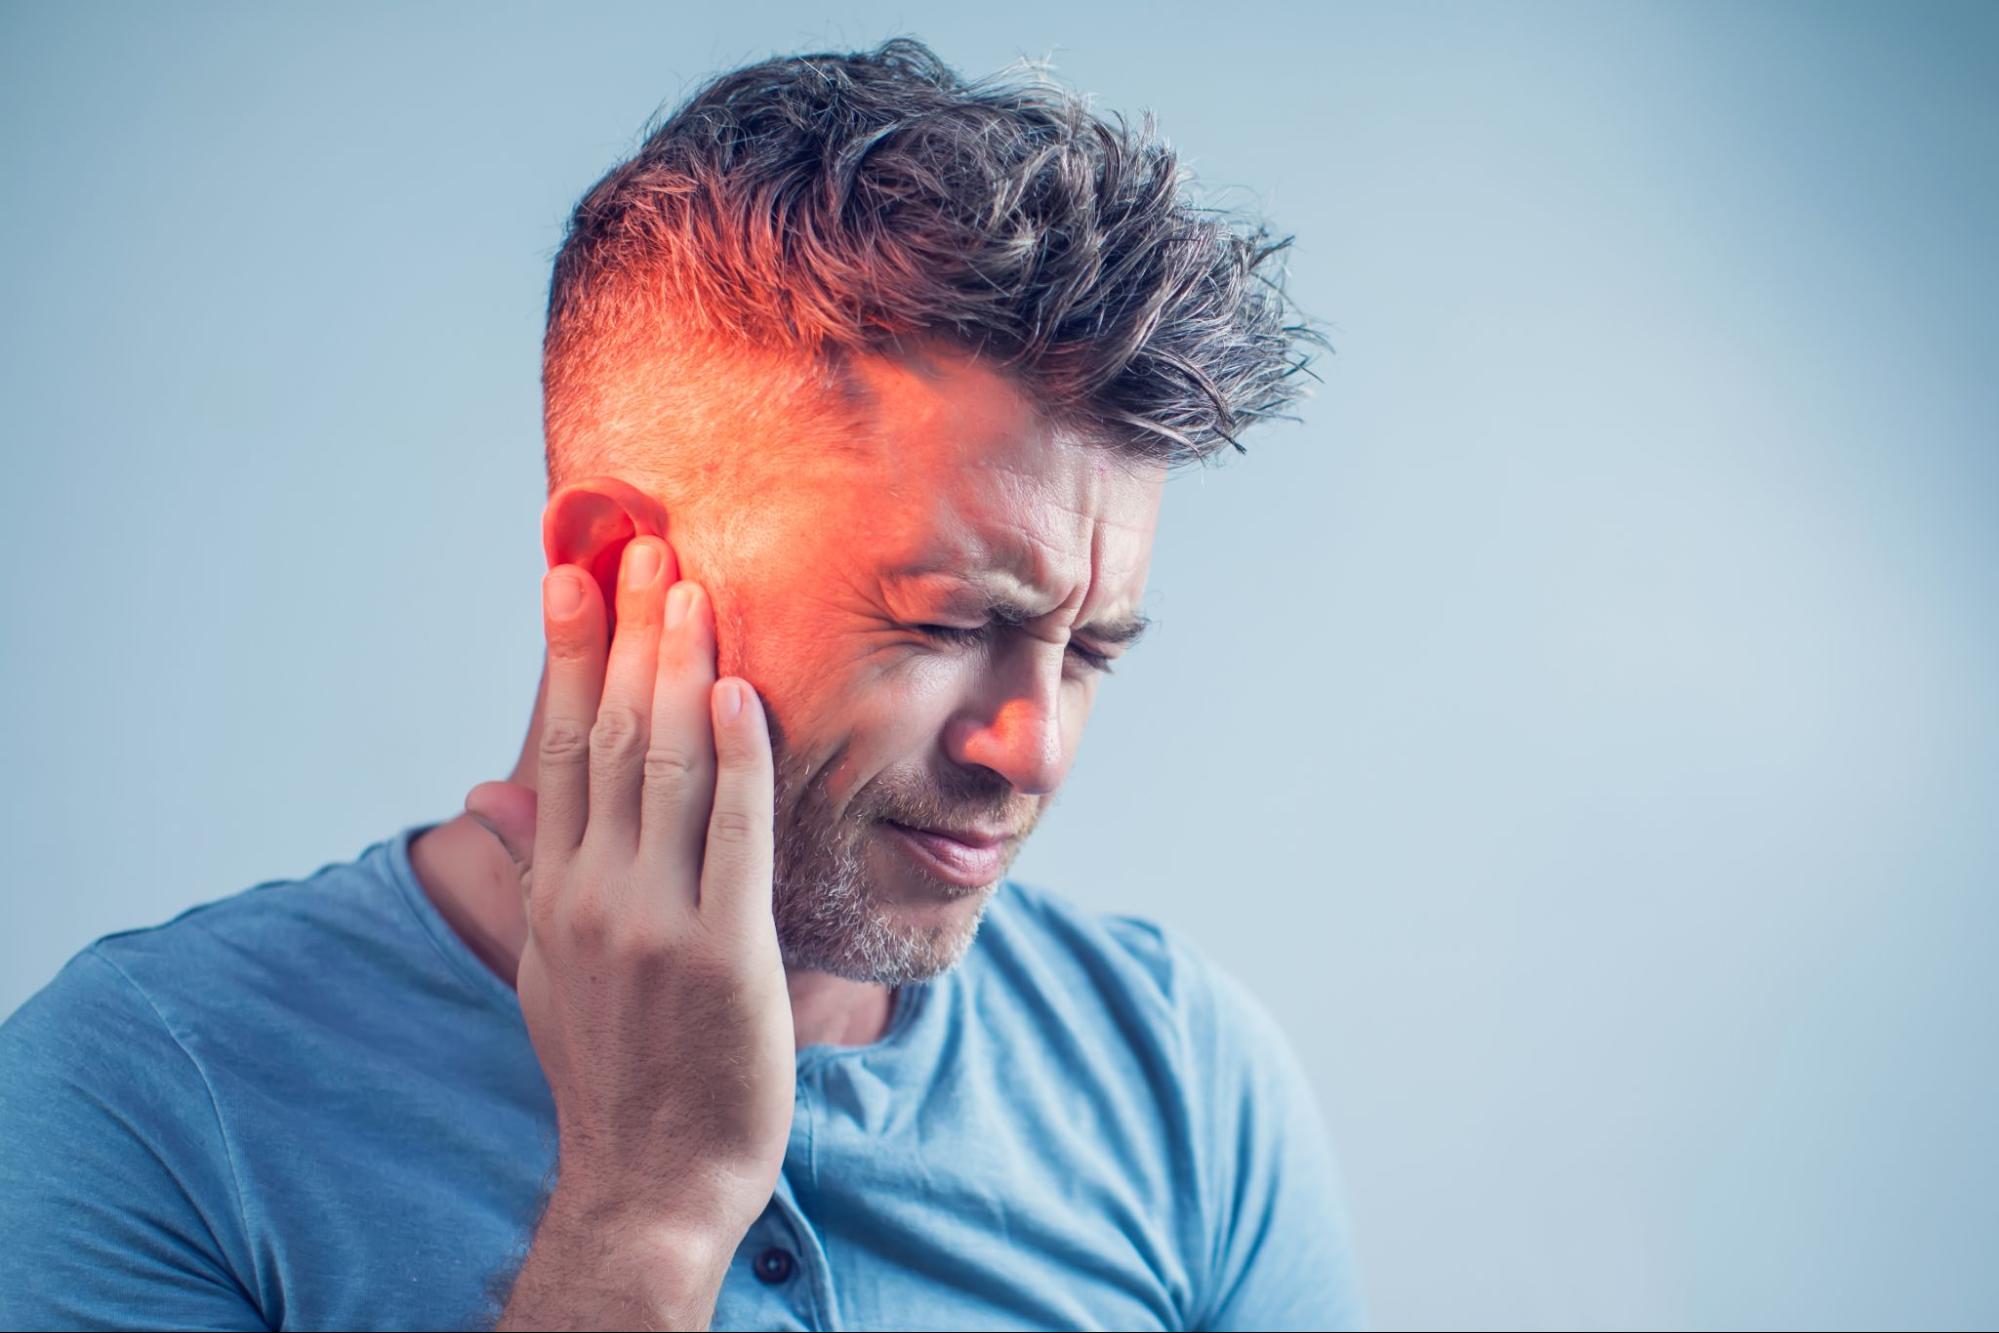 Can ear infections lead to hearing loss?